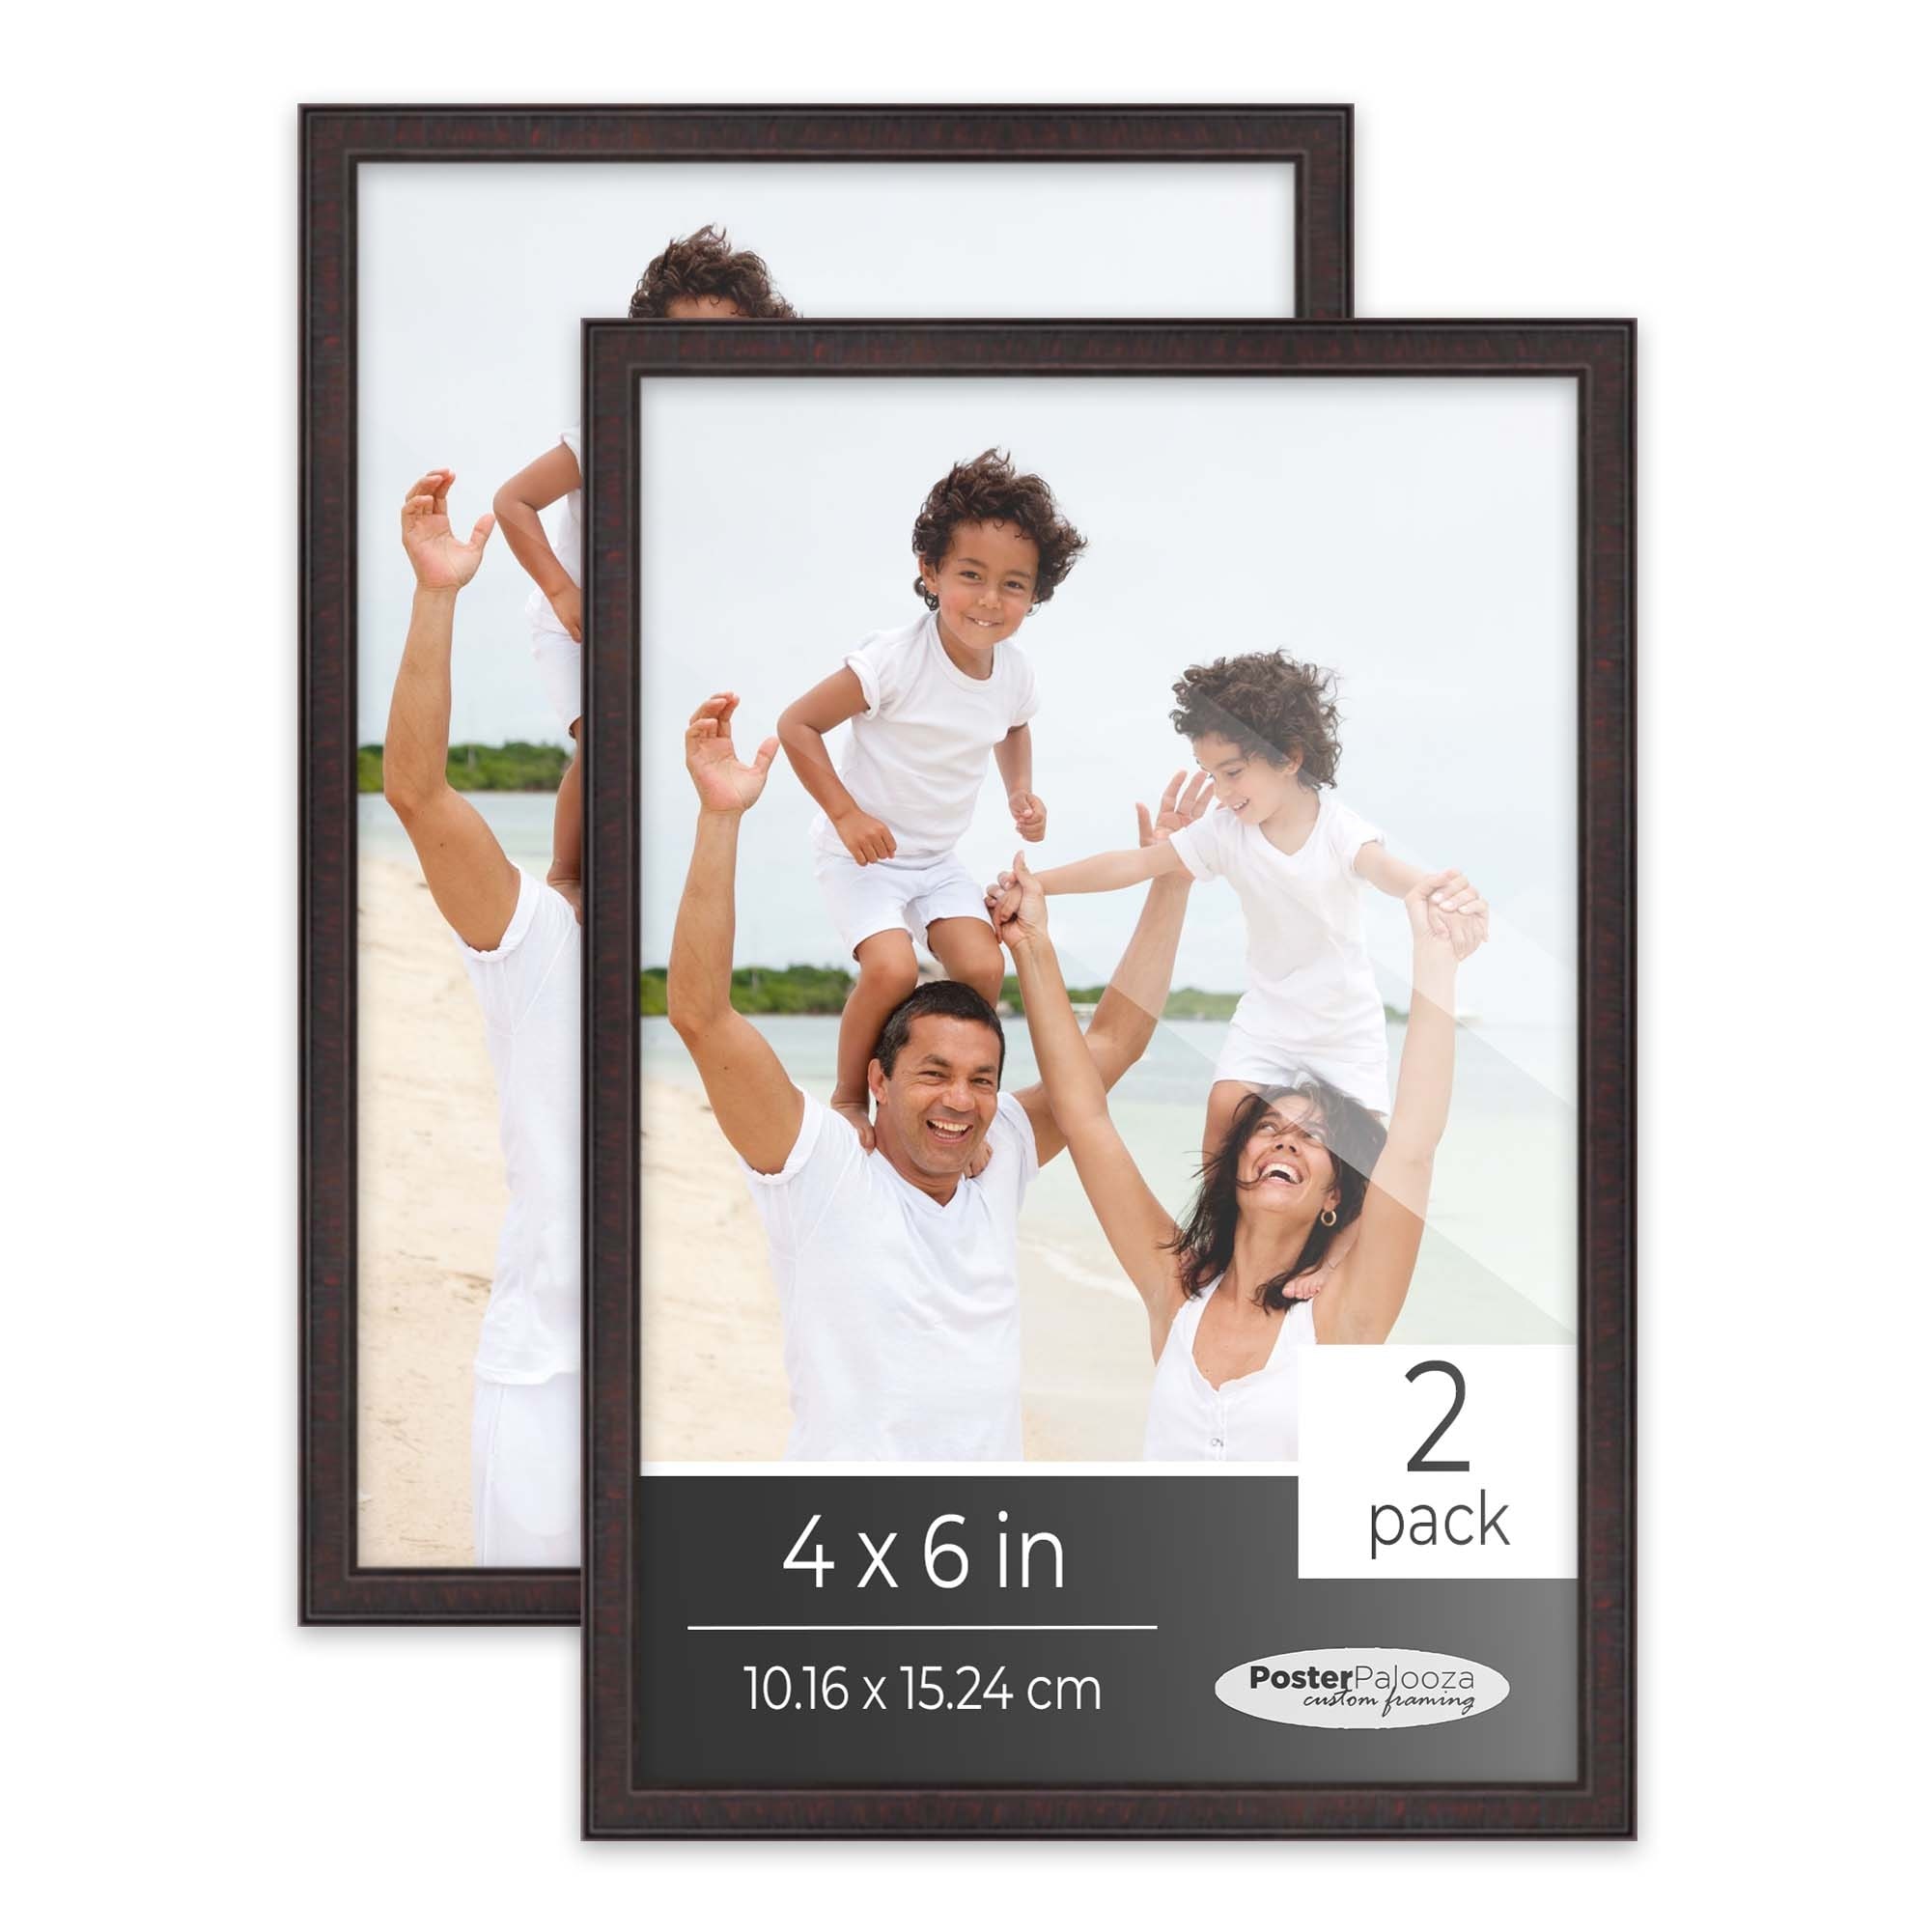 https://ak1.ostkcdn.com/images/products/is/images/direct/49001e1ef1d0db62a4c2098bc3f9fdf39e39ec8c/4x6-Rustic-Brown-Picture-Frame-Set-Pack-of-2-4x6-Wood-Picture-Frames-for-Gallery-Wall-2-4x6-Rustic-Brown-Frames.jpg